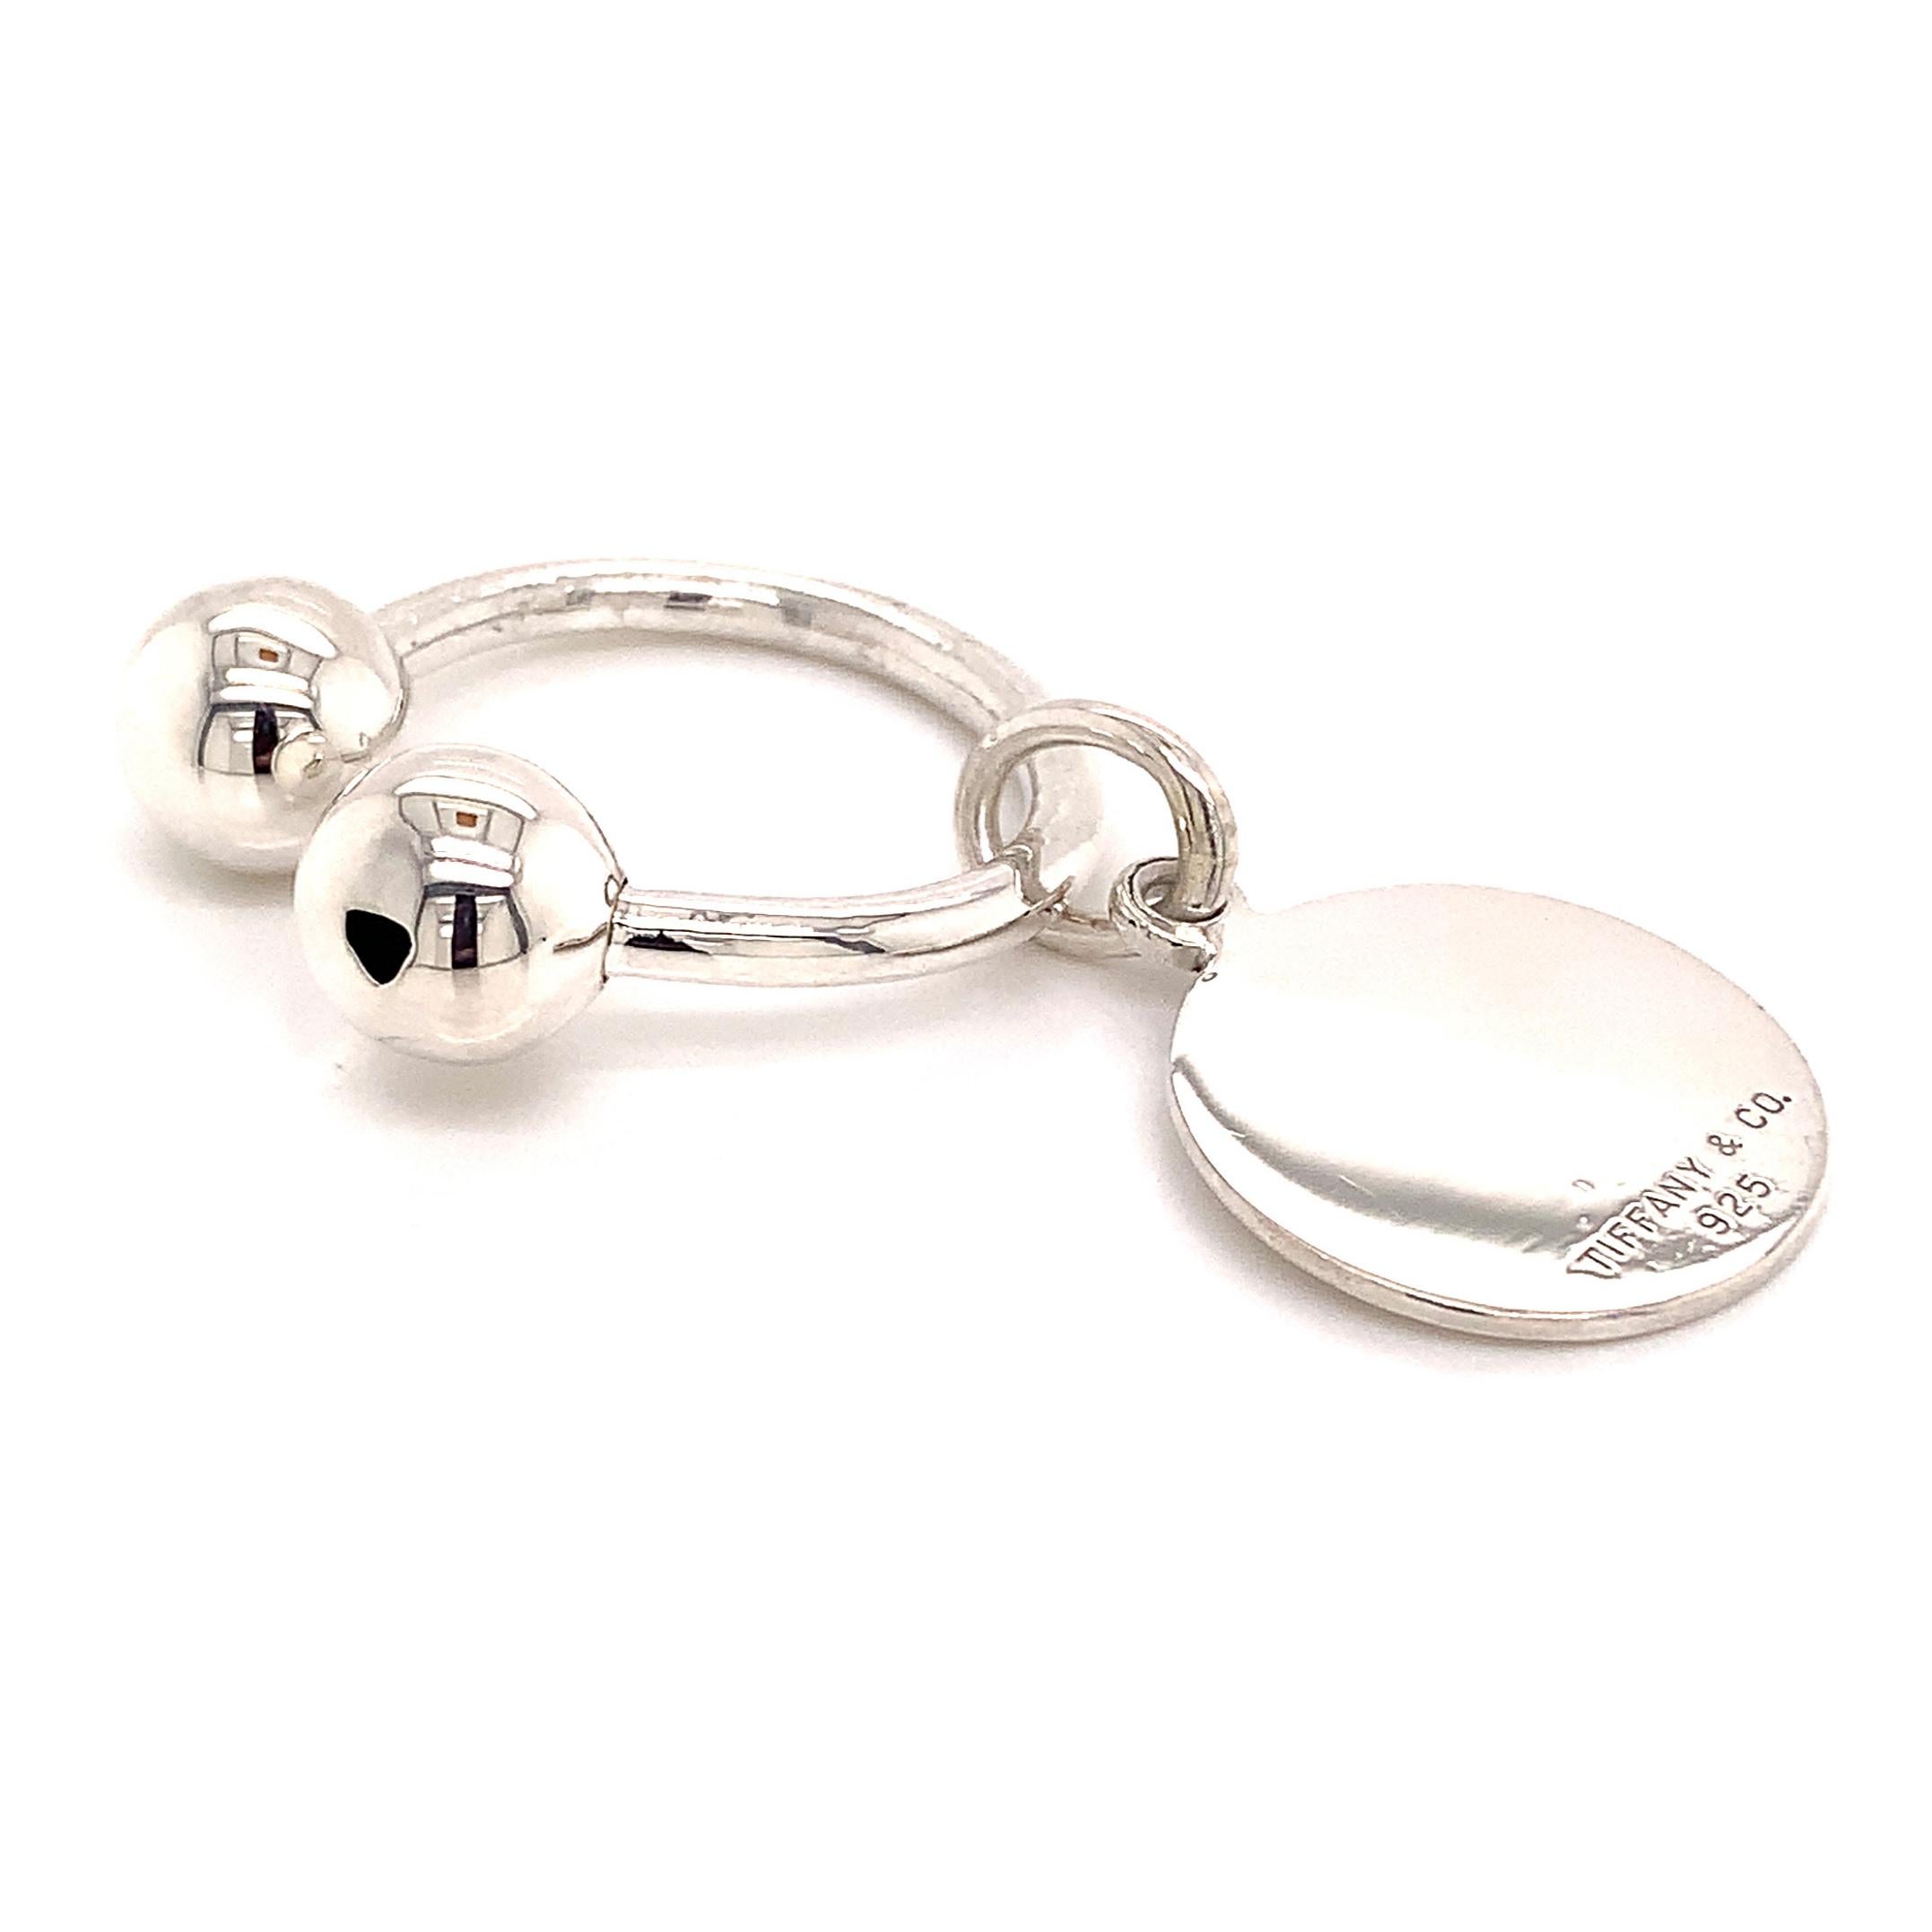 Tiffany & Co Estate Sterling Silver Keychain 9.2 Grams TIF147

TRUSTED SELLER SINCE 2002

PLEASE SEE OUR HUNDREDS OF POSITIVE FEEDBACKS FROM OUR CLIENTS!!

FREE SHIPPING

DETAILS
Metal: Sterling Silver
Weight: 9.2 Grams

This Authentic Tiffany & Co.